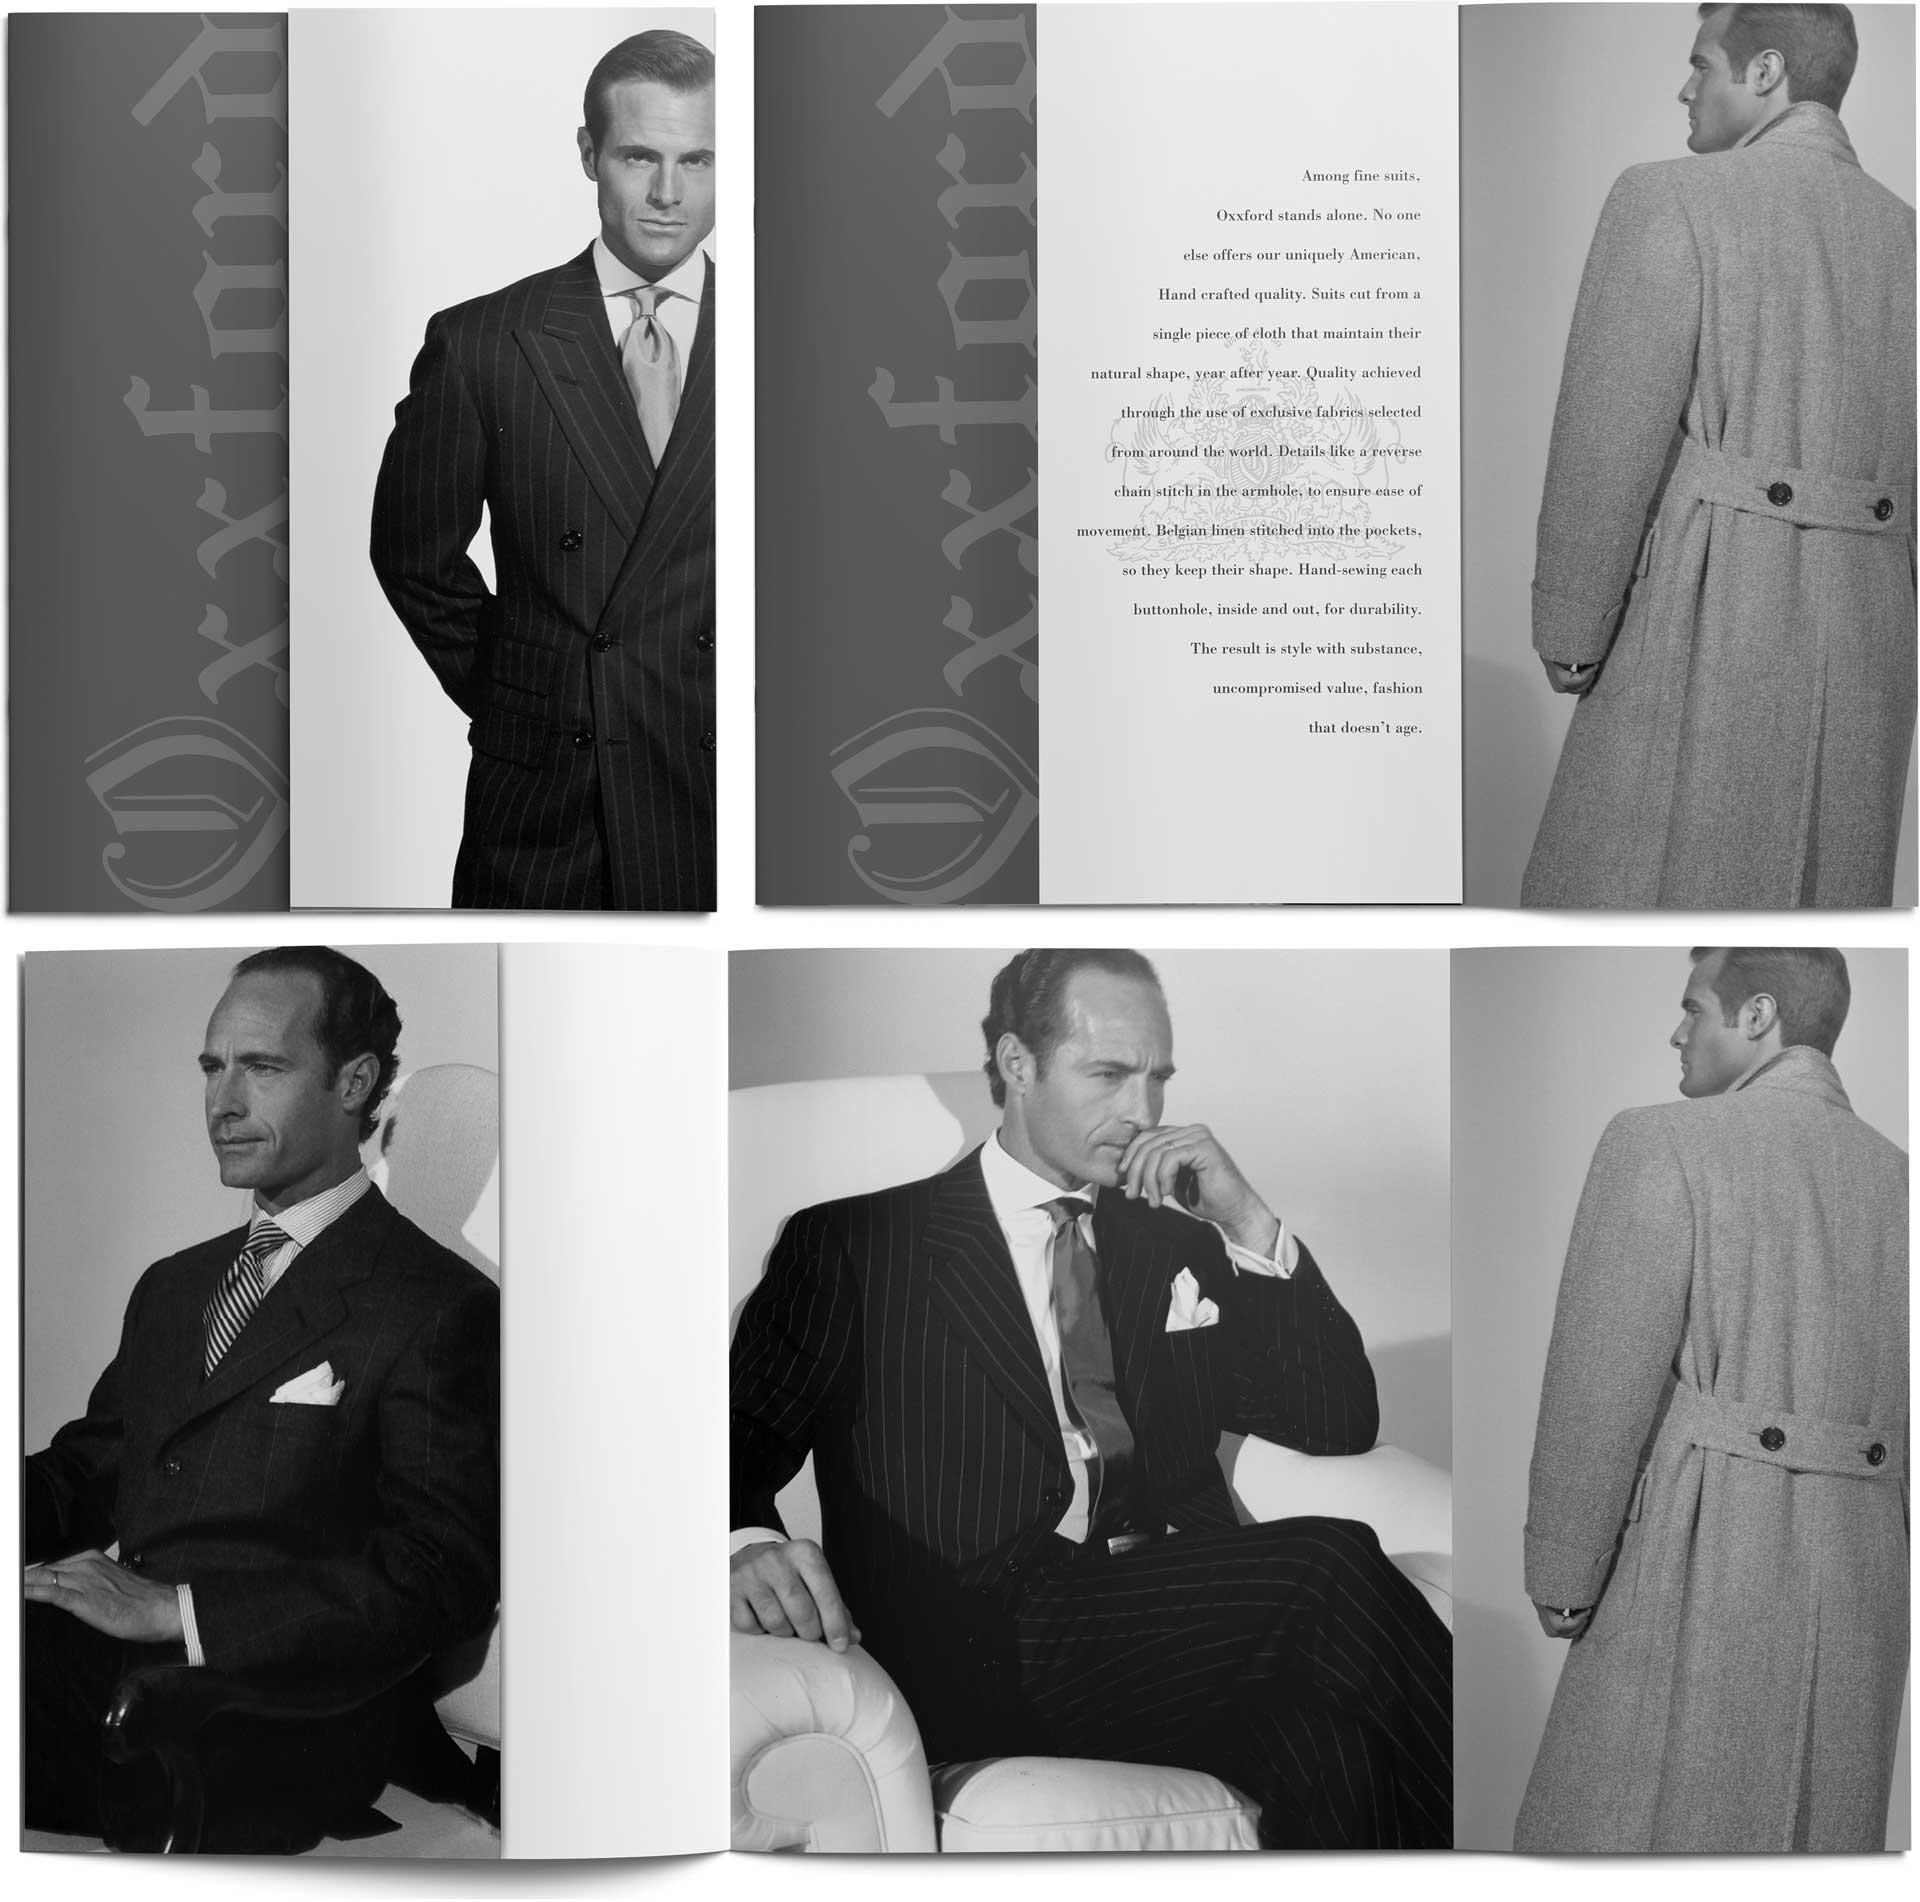 Sales brochure for Oxford Clothes